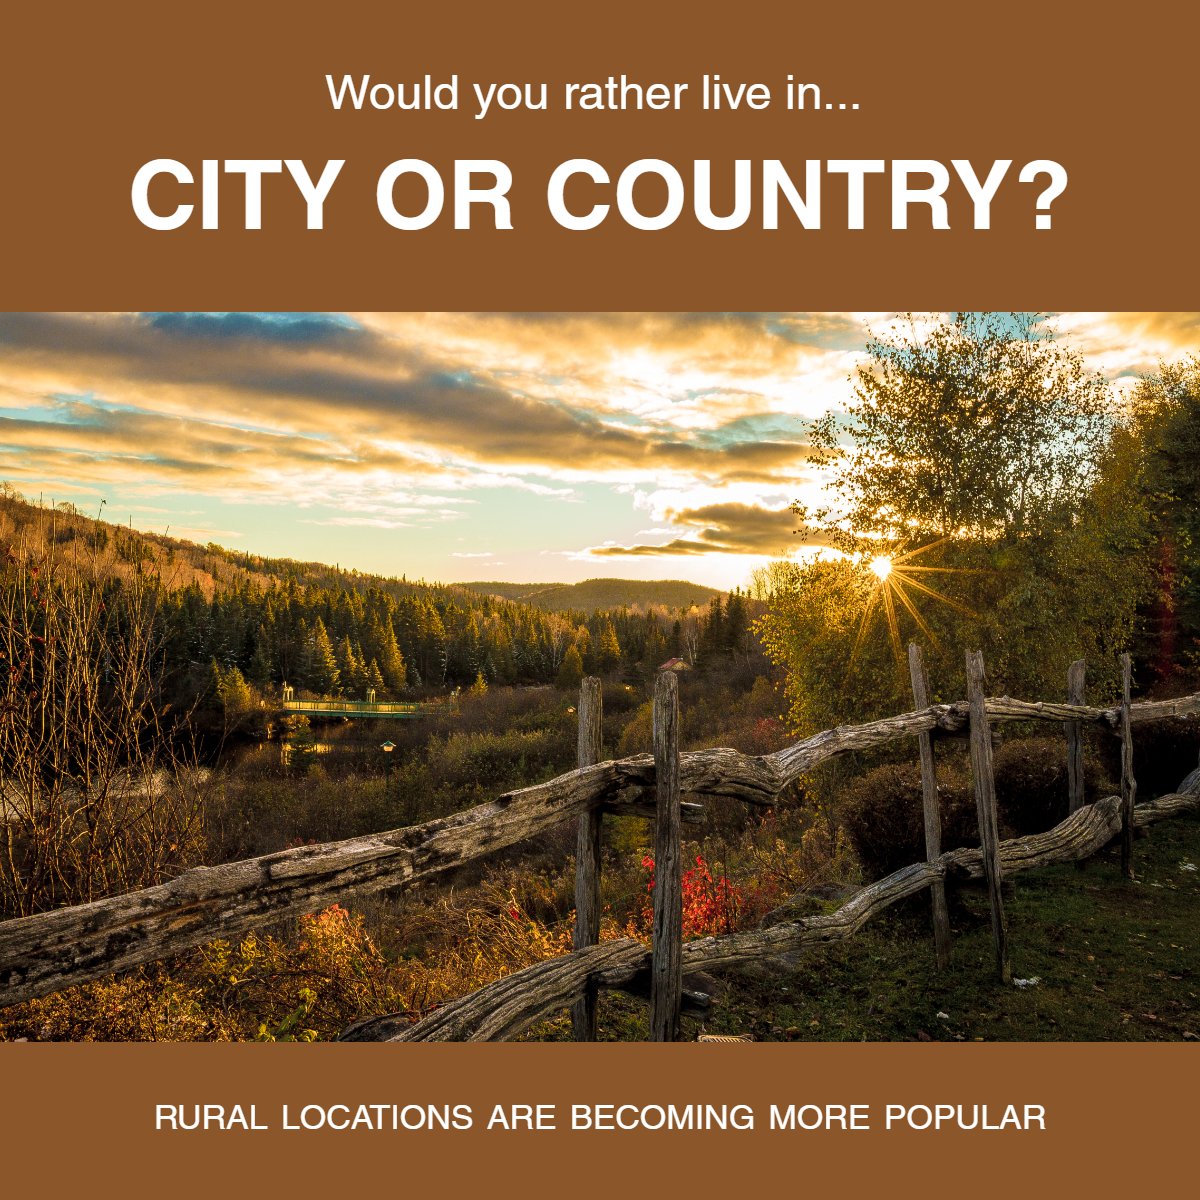 Would you rather live in the city or country? 🏙️🌄

#wouldyourather #cityorcountry #citylights #realestatequestion #realestate
 #realtor #northport #northportfl #movingtonorthpotflorida #sarasotarealestate #whatsmyhomeworth #movingtoflorida #northportflorida